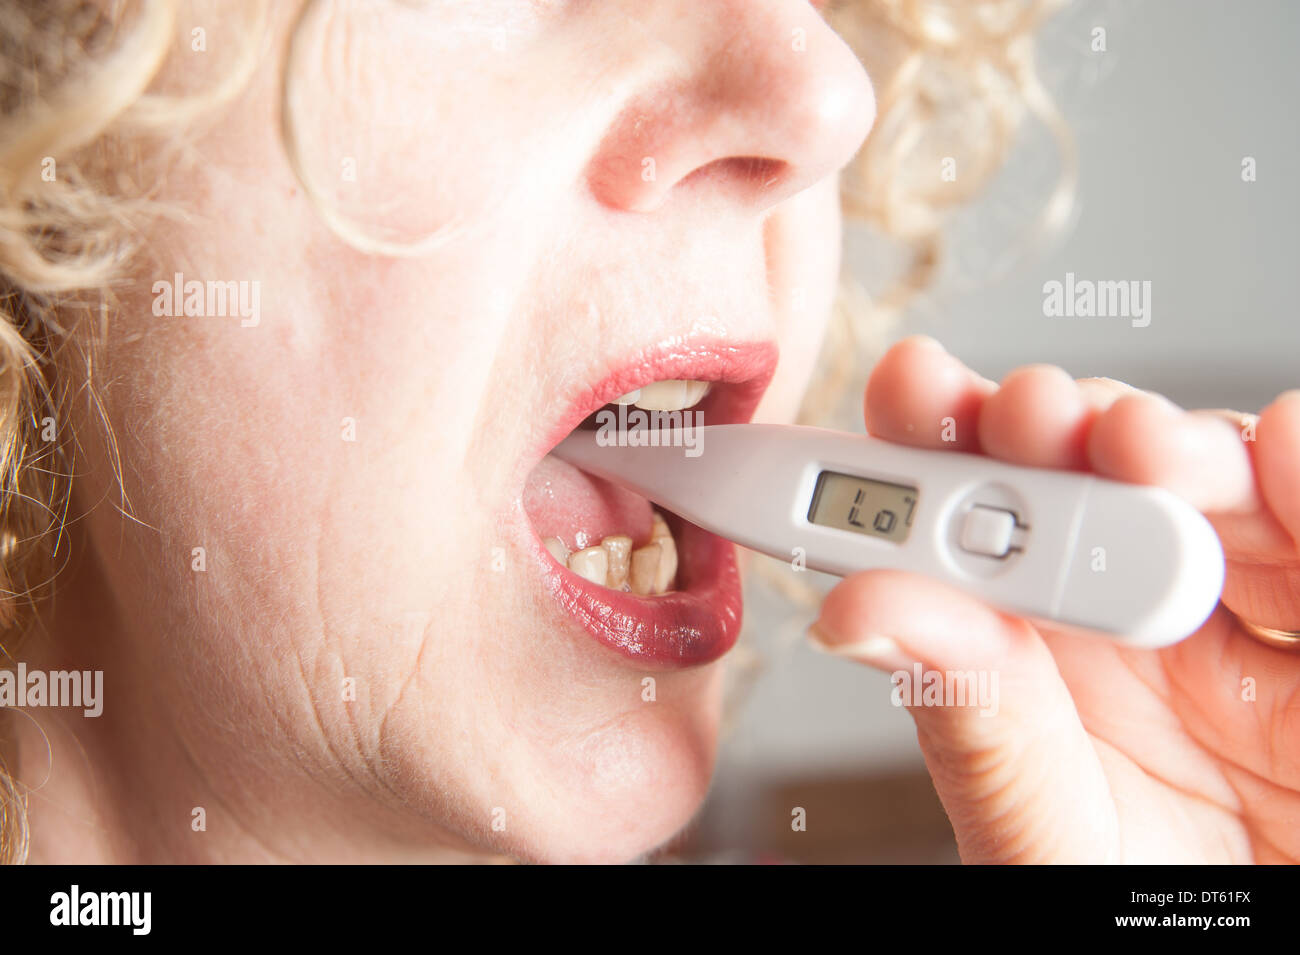 Woman taking her own temperature using digital thermometer Stock Photo